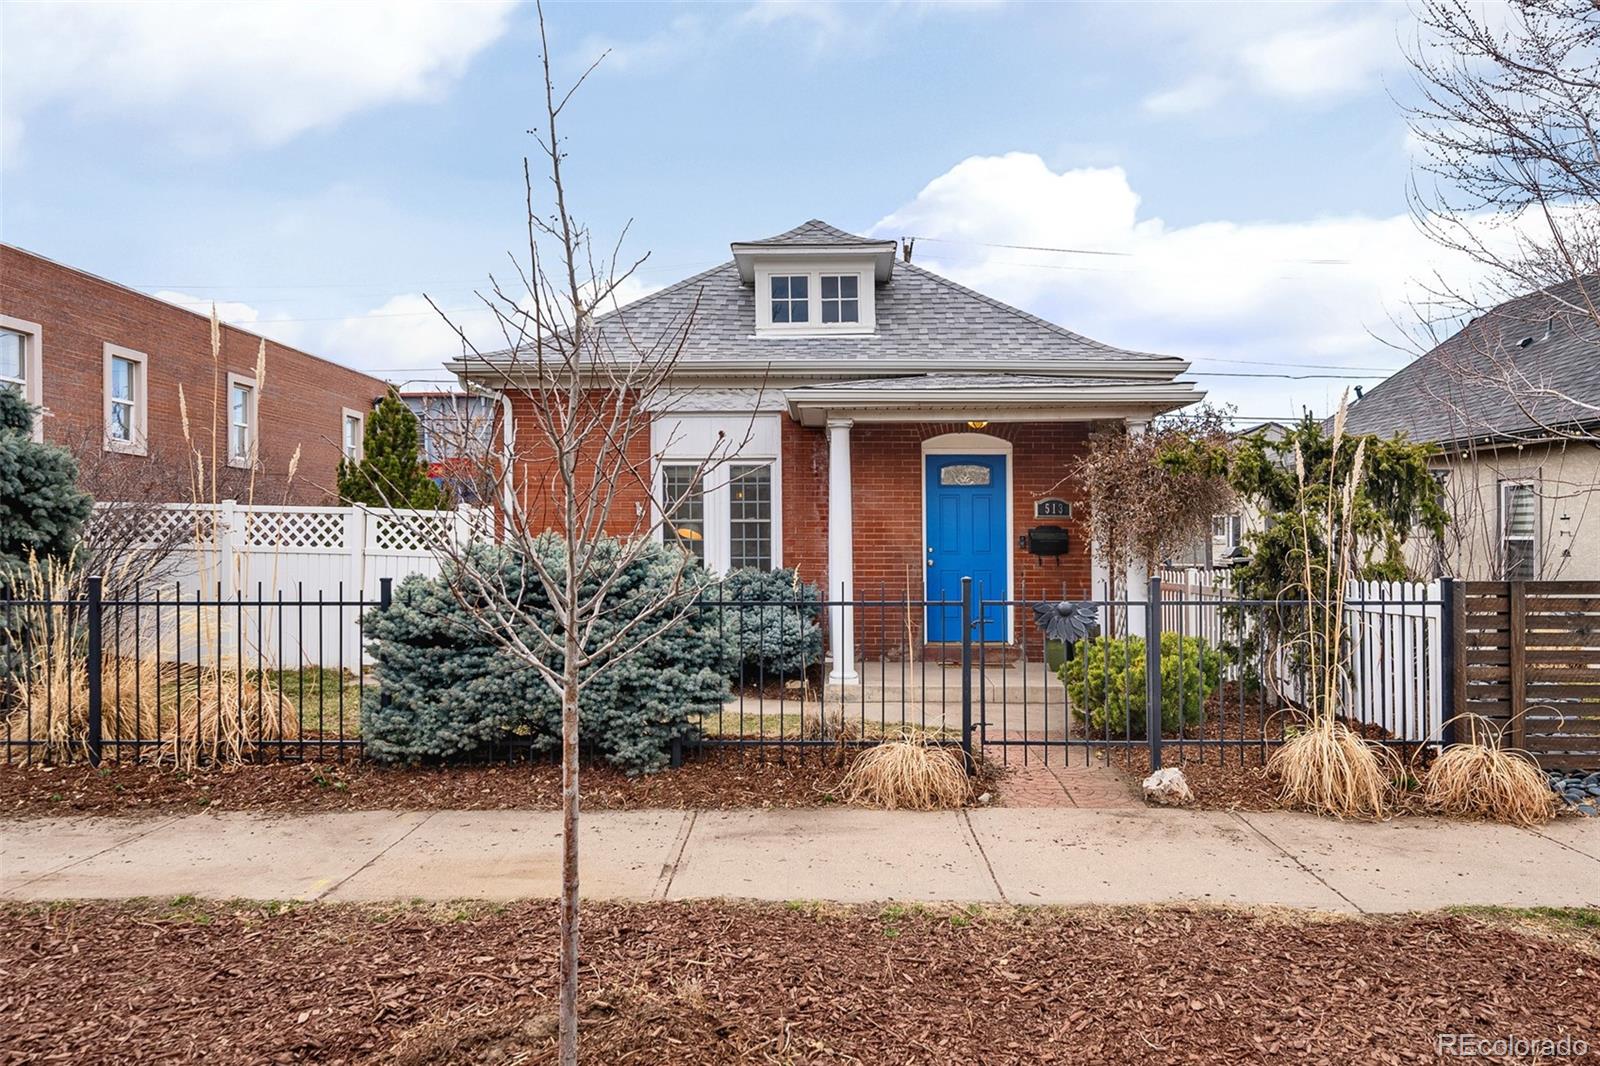 513  inca street, denver sold home. Closed on 2024-05-13 for $615,000.